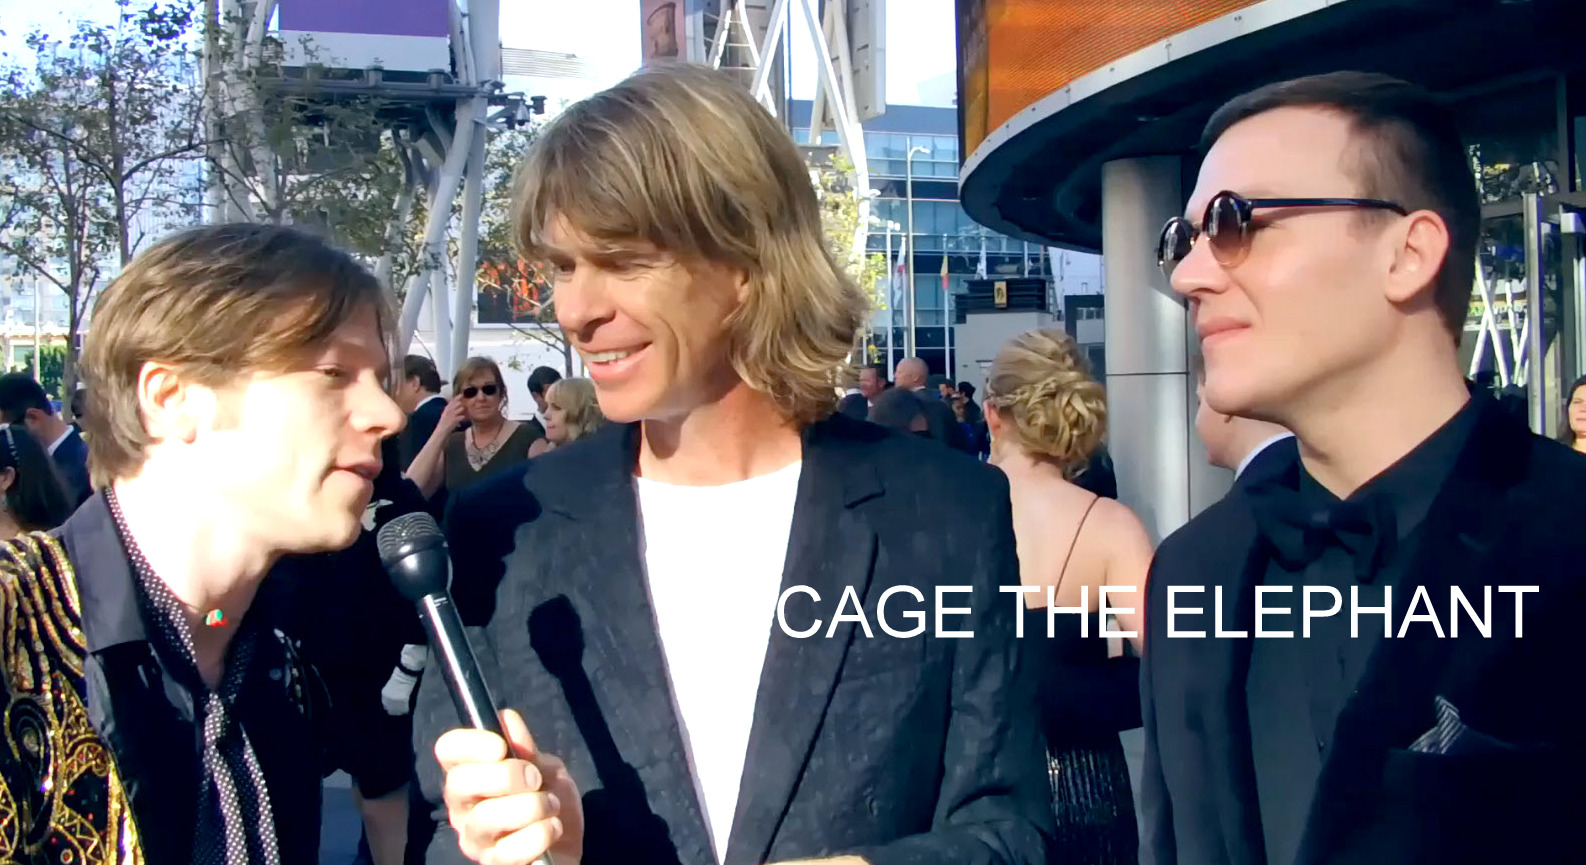 Gregory Graham aka Heavy Metal Greg interviewing Matthew Shultz and Brad Shultz of Cage the Elephant at the 2015 Grammy Awards.